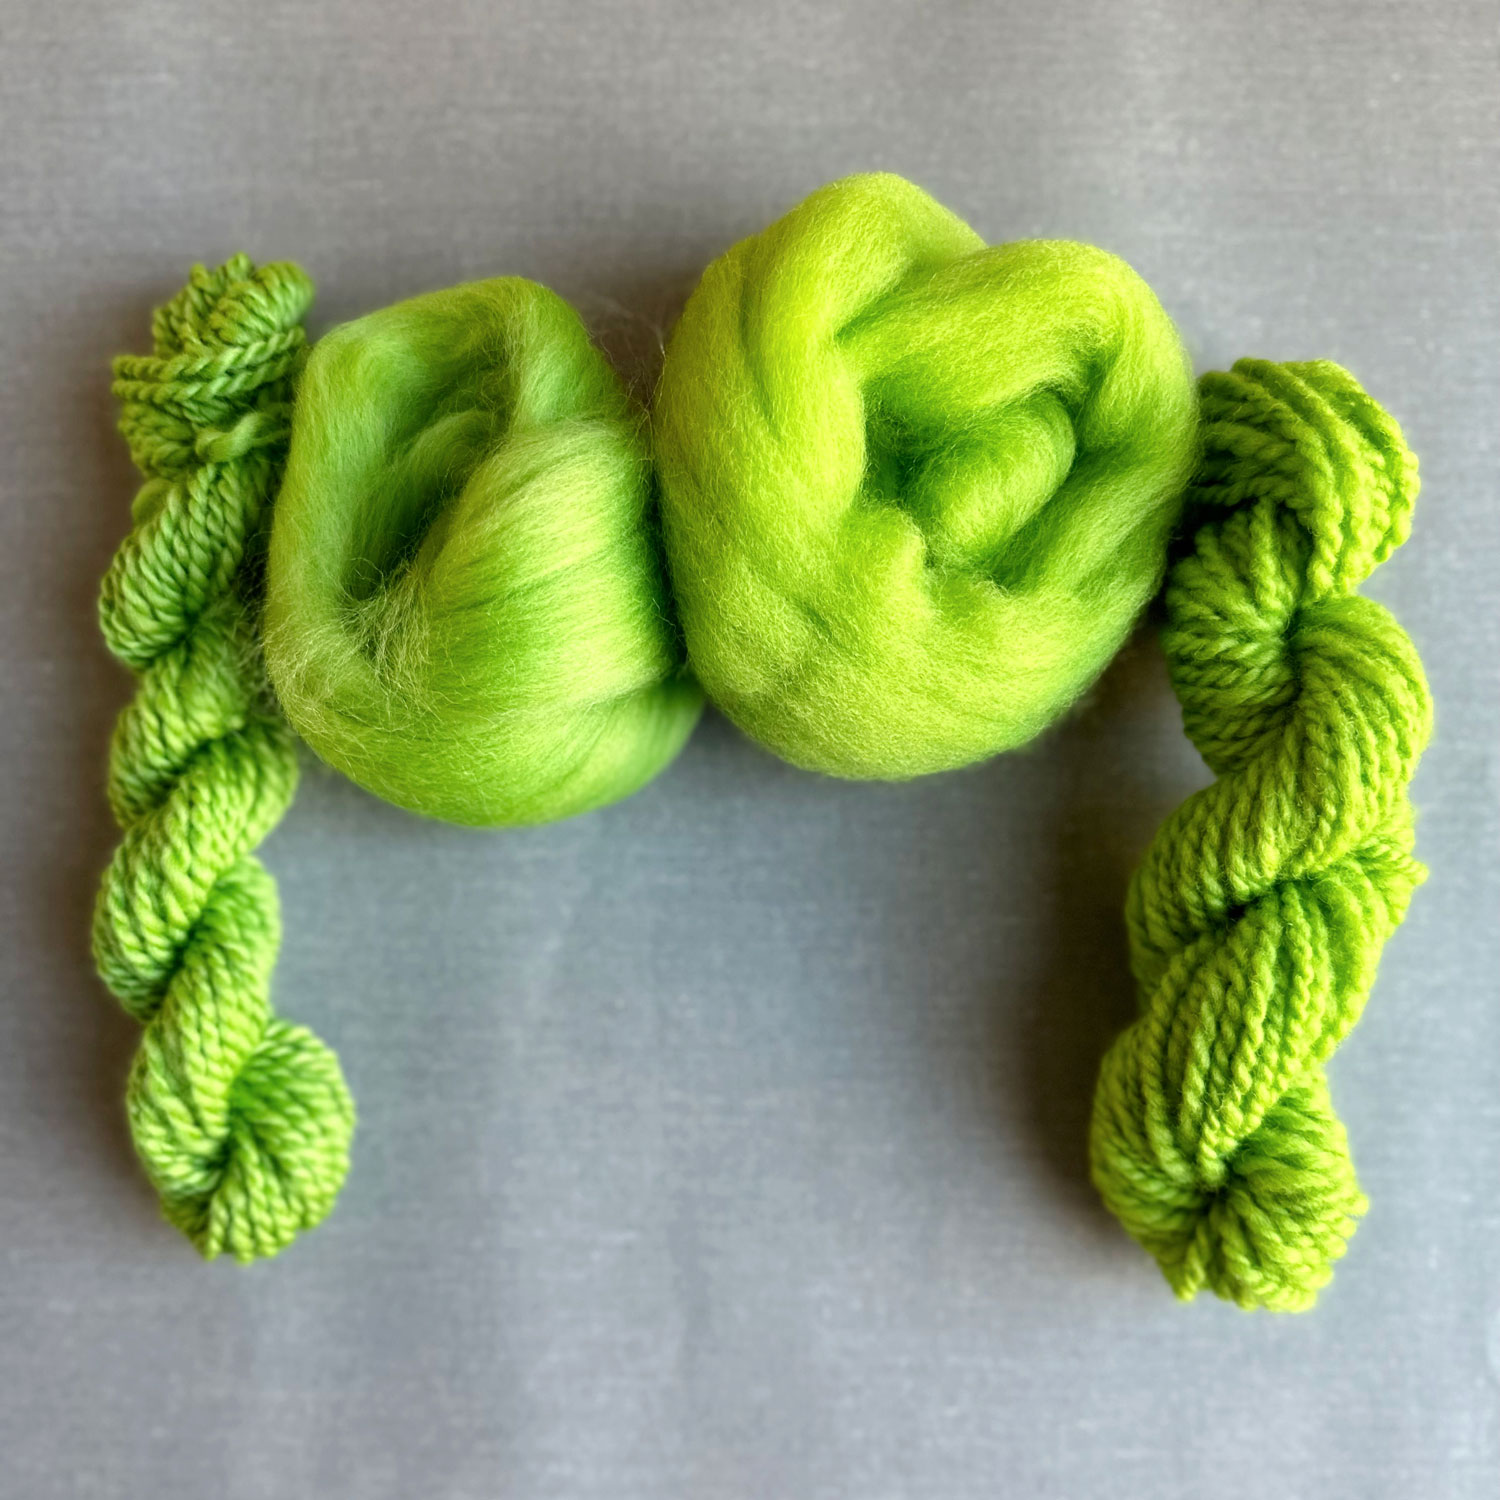 Do You Spin Worsted, Woolen, or Something Between?